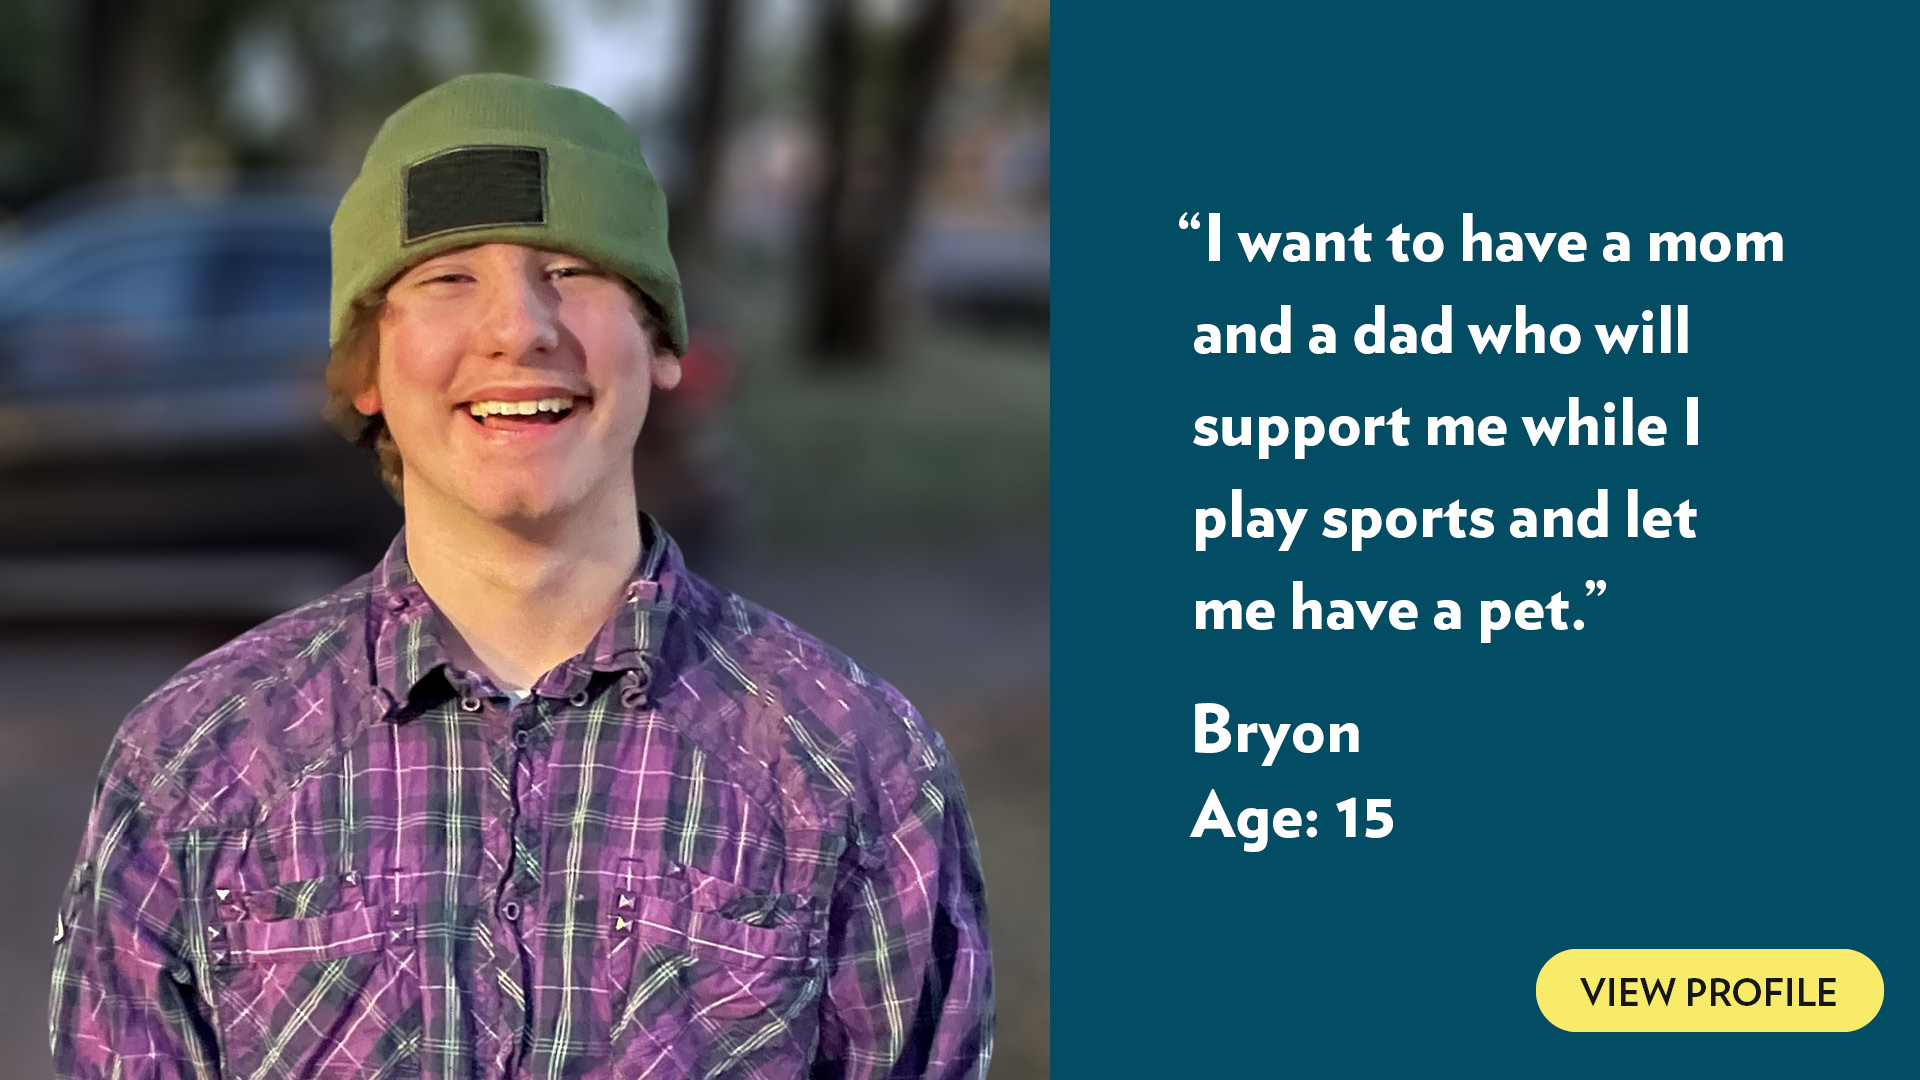 I want to have a mom and a dad who will support me while I play sports and let me have a pet. Bryon, age 15. View profile.